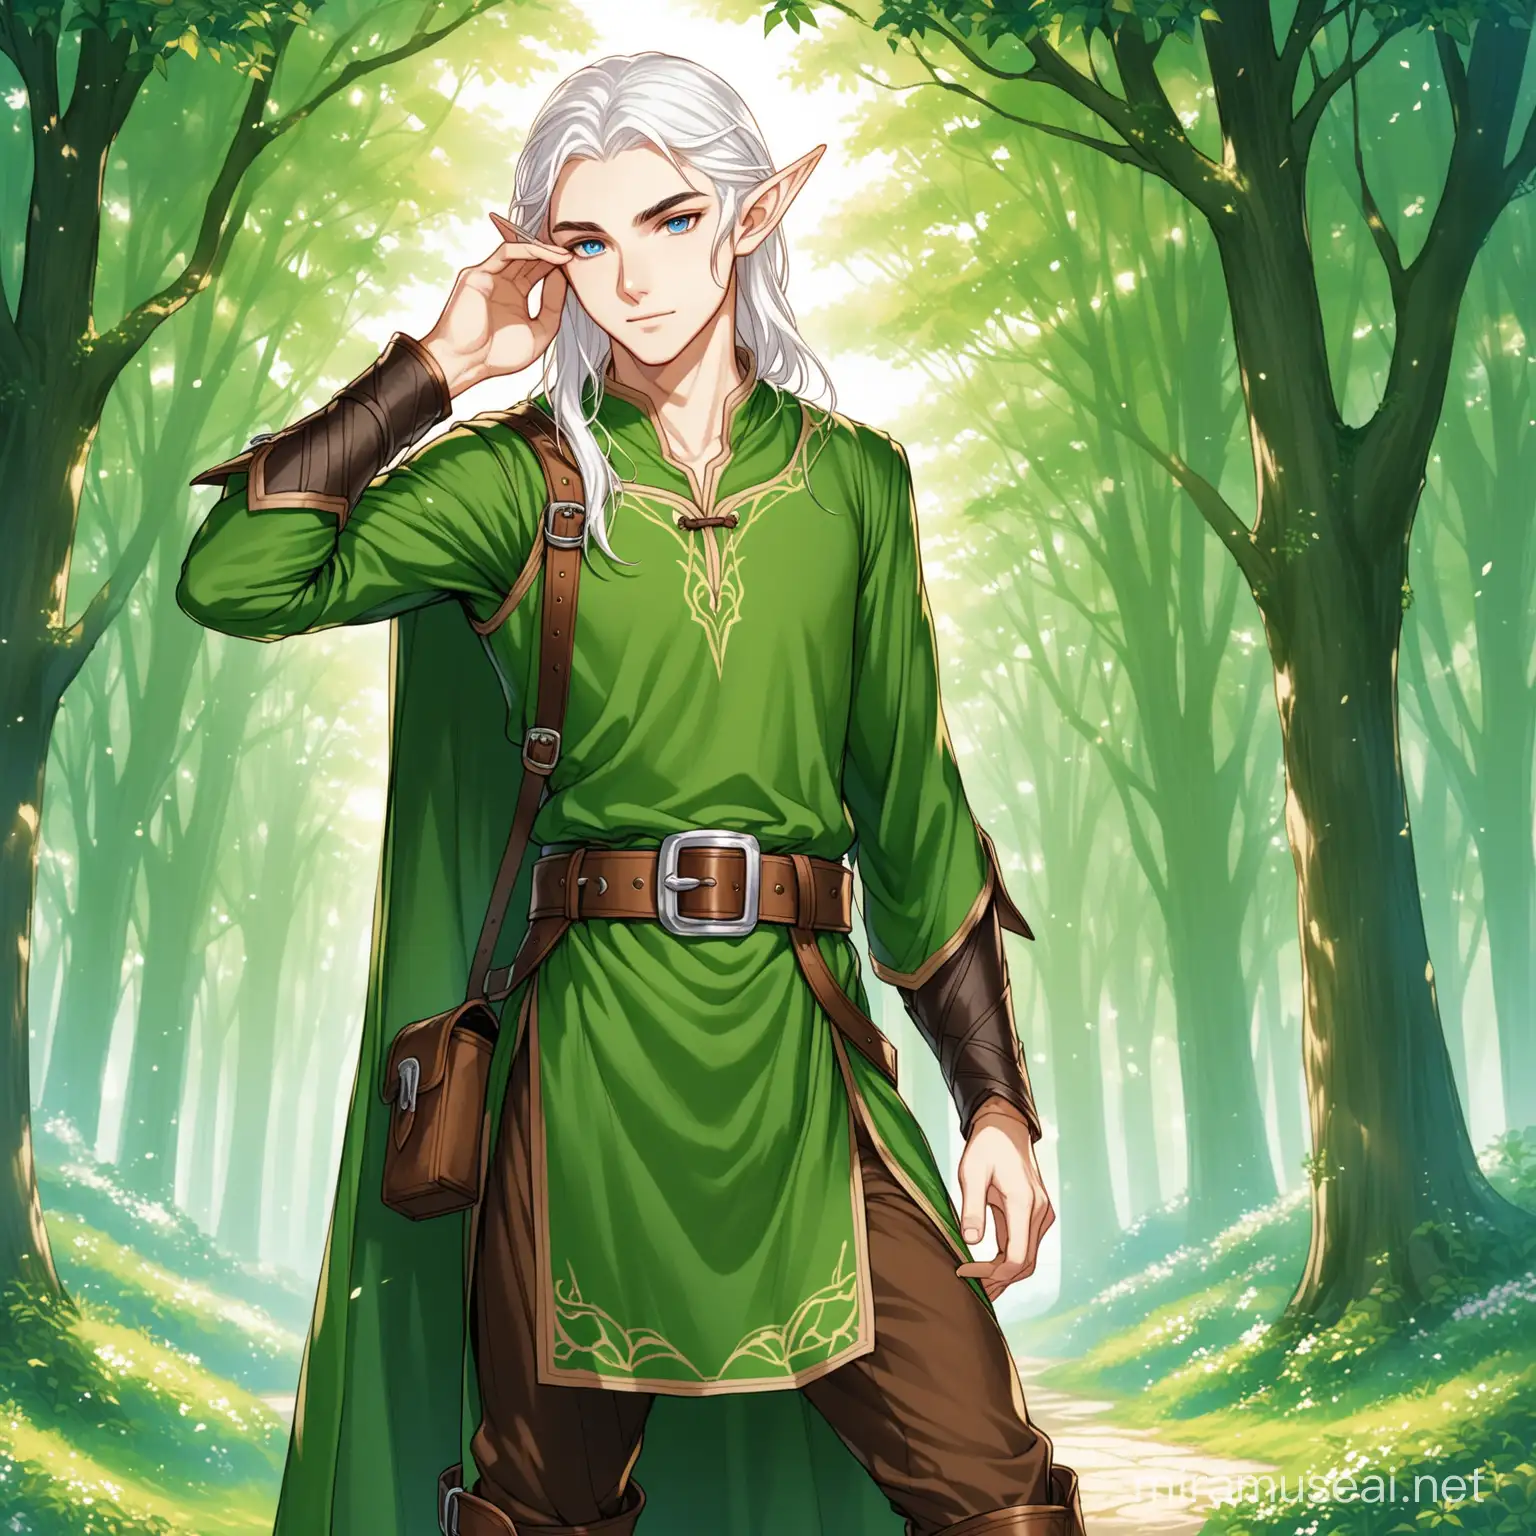 Elegant Tolkien Elf with Long White Hair and Blue Eyes